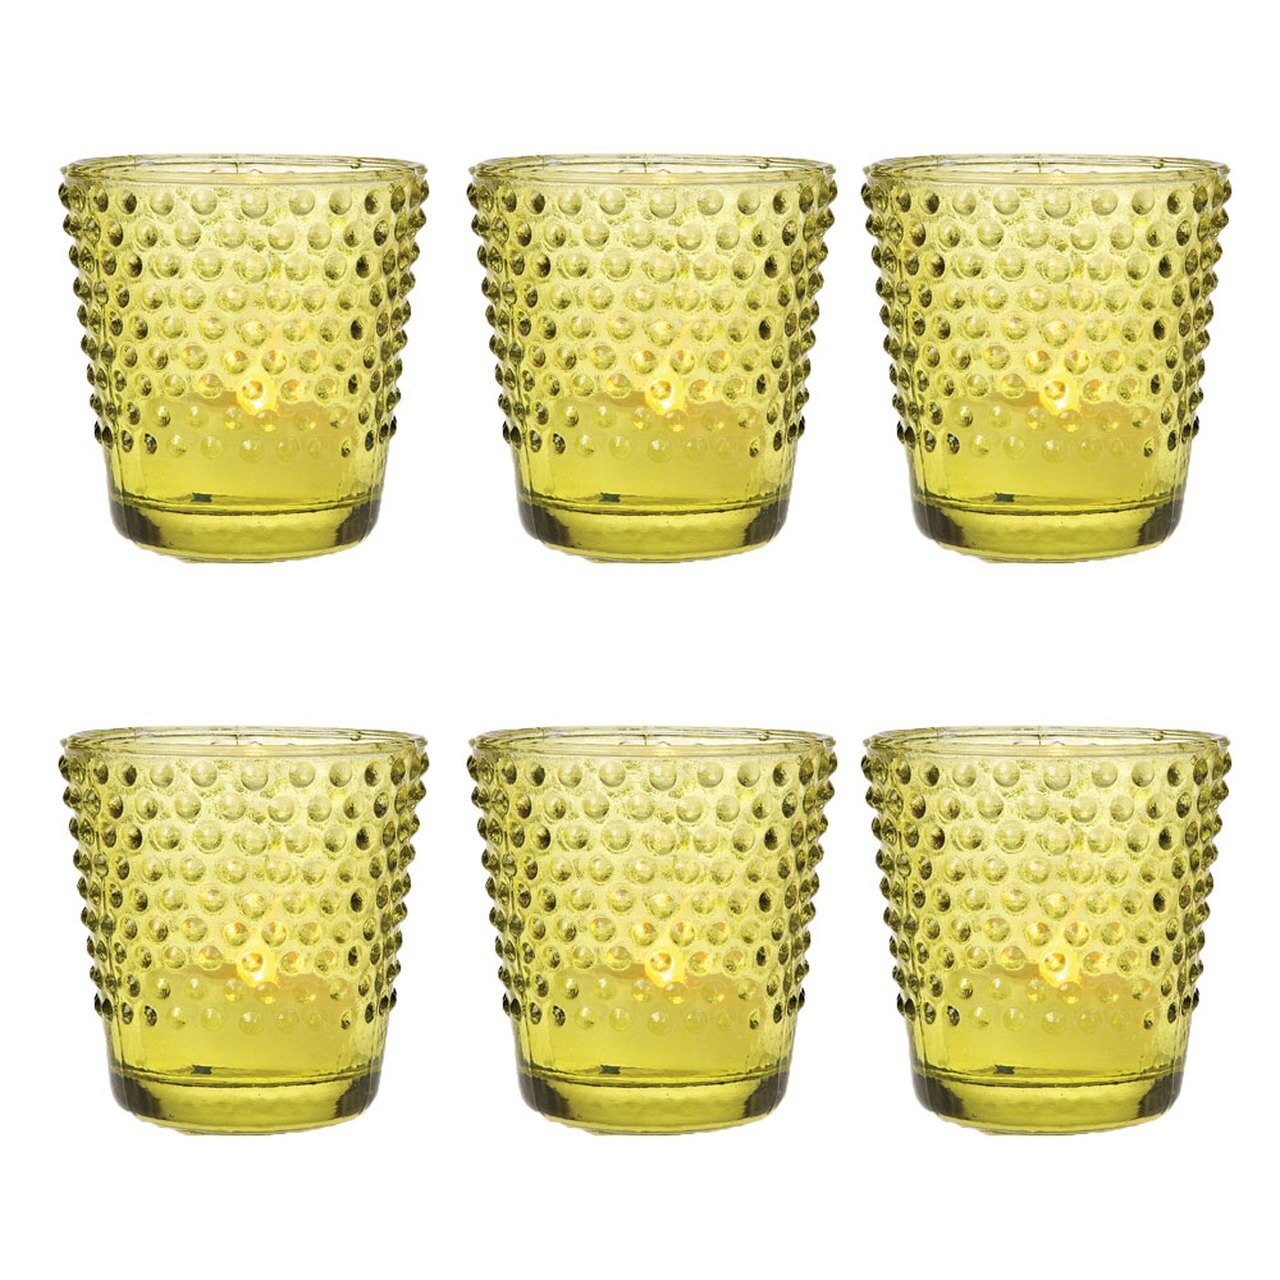  6 Pack | Vintage Glass Hobnail Glass Candle Holder (2.25-Inches, Candace Design, Chartreuse Green) - For Use with Tea Lights - For Home Decor, Parties and Wedding Decorations - AsianImportStore.com - B2B Wholesale Lighting and Decor